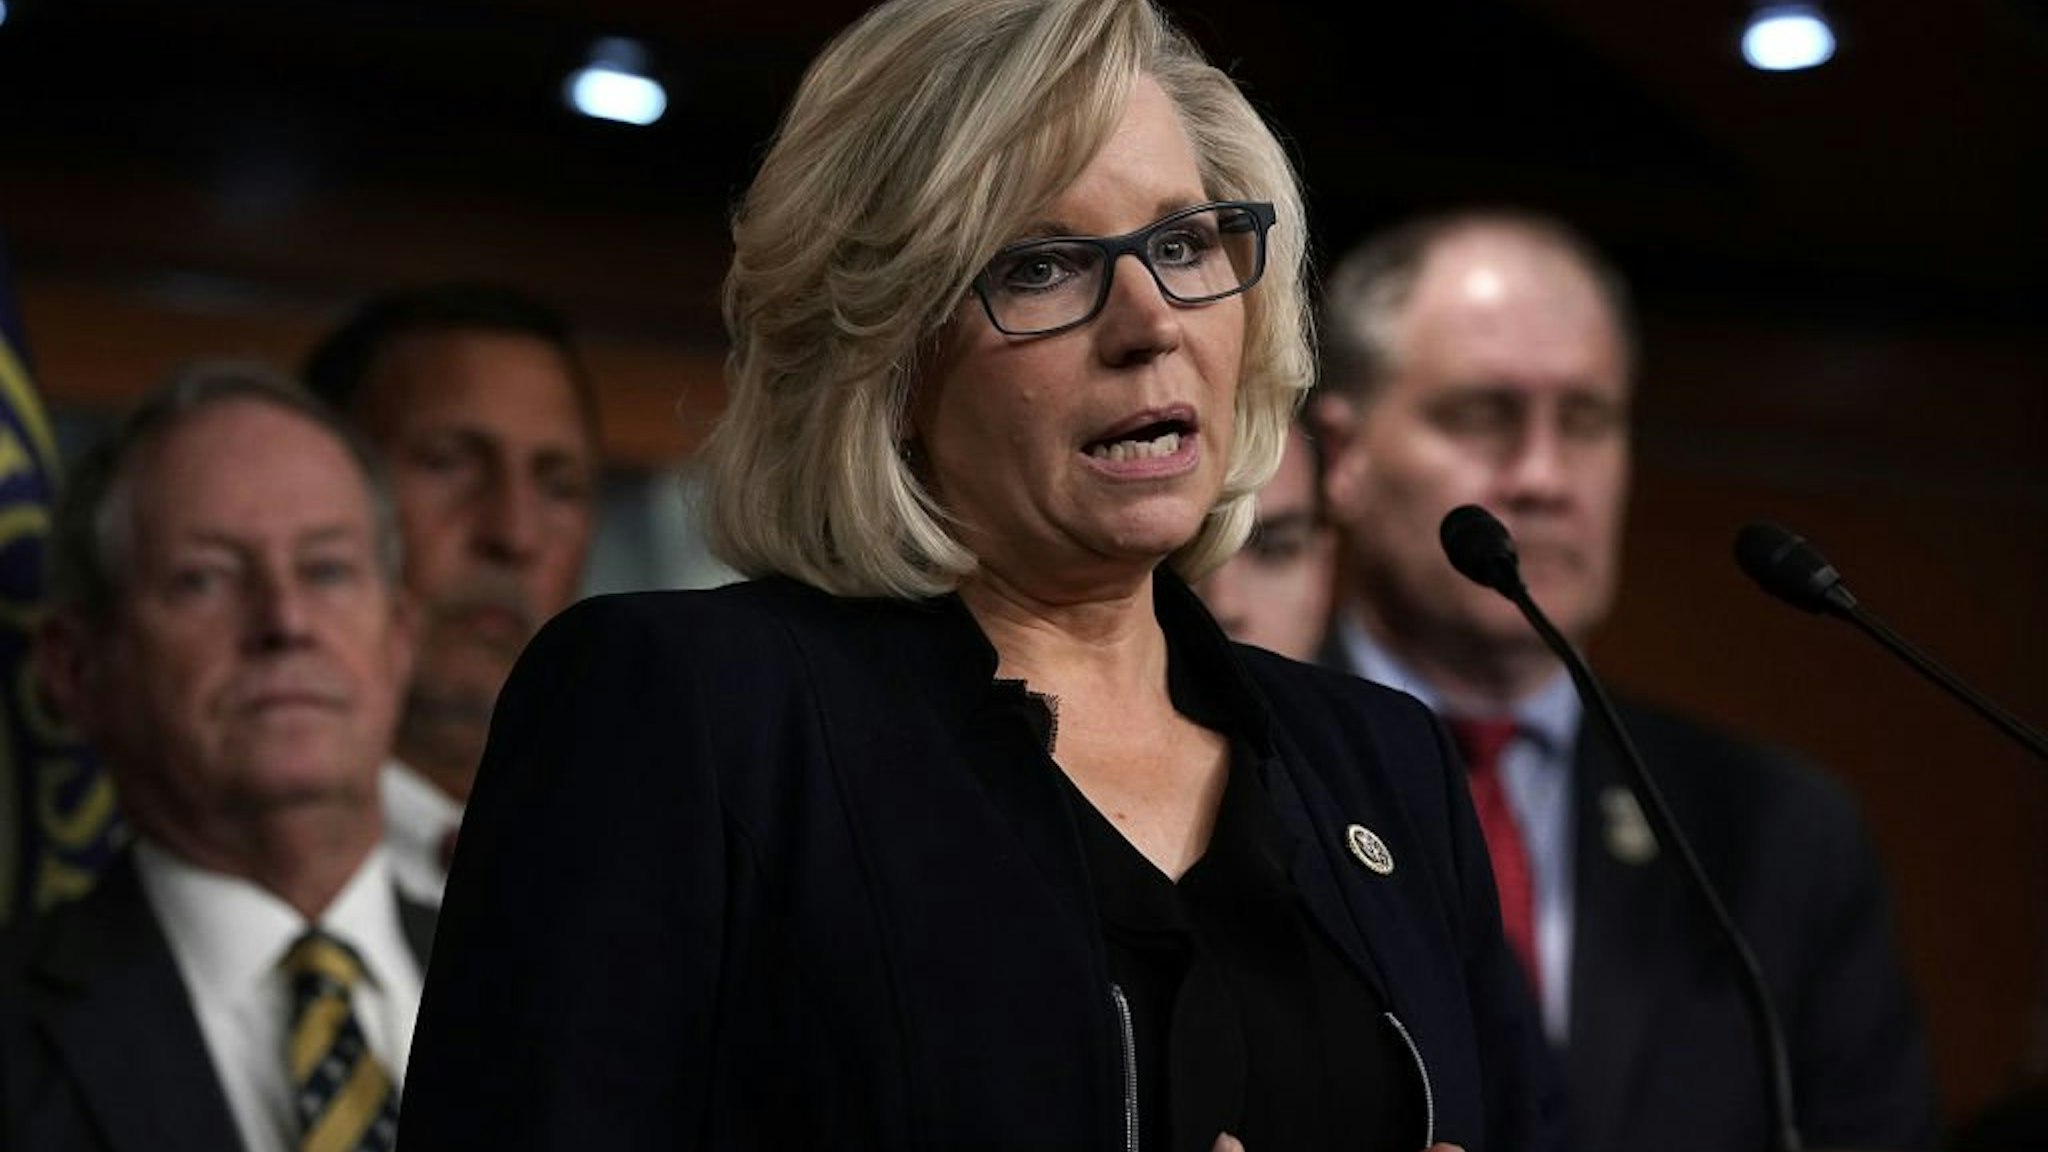 Liz Cheney speaks during a news conference February 7, 2018 on Capitol Hill